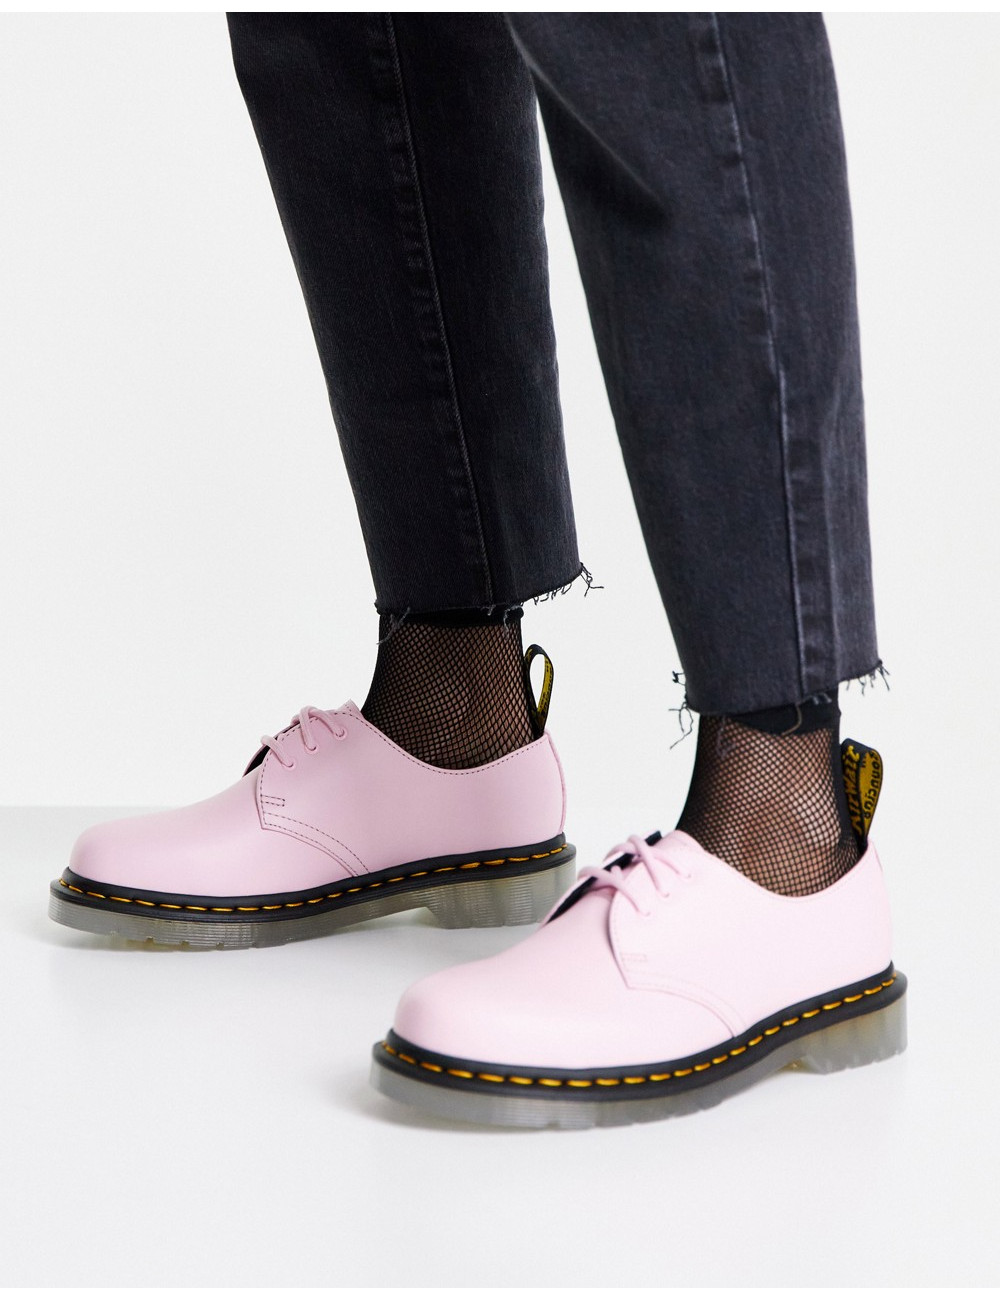 Dr Martens 1461 Iced shoes...